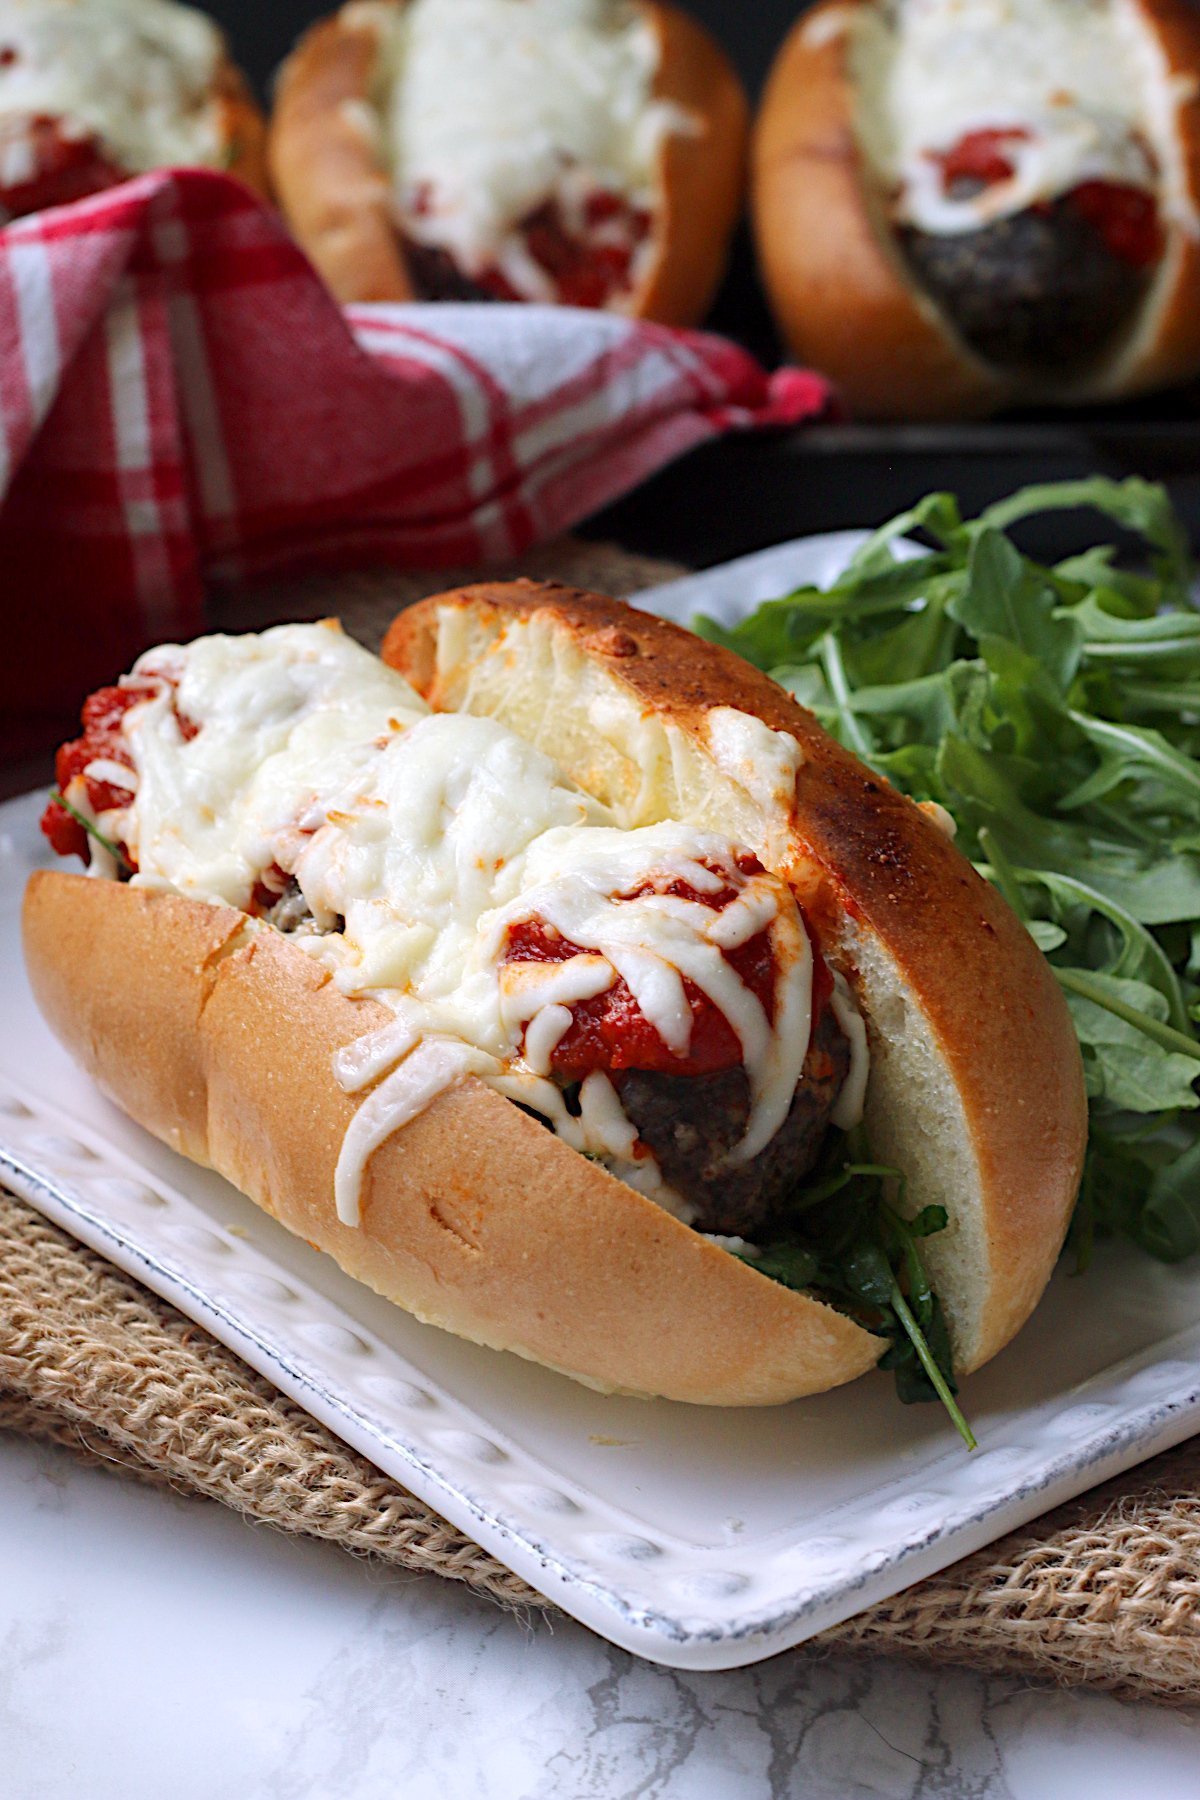 Meatball sub on a square white plate.